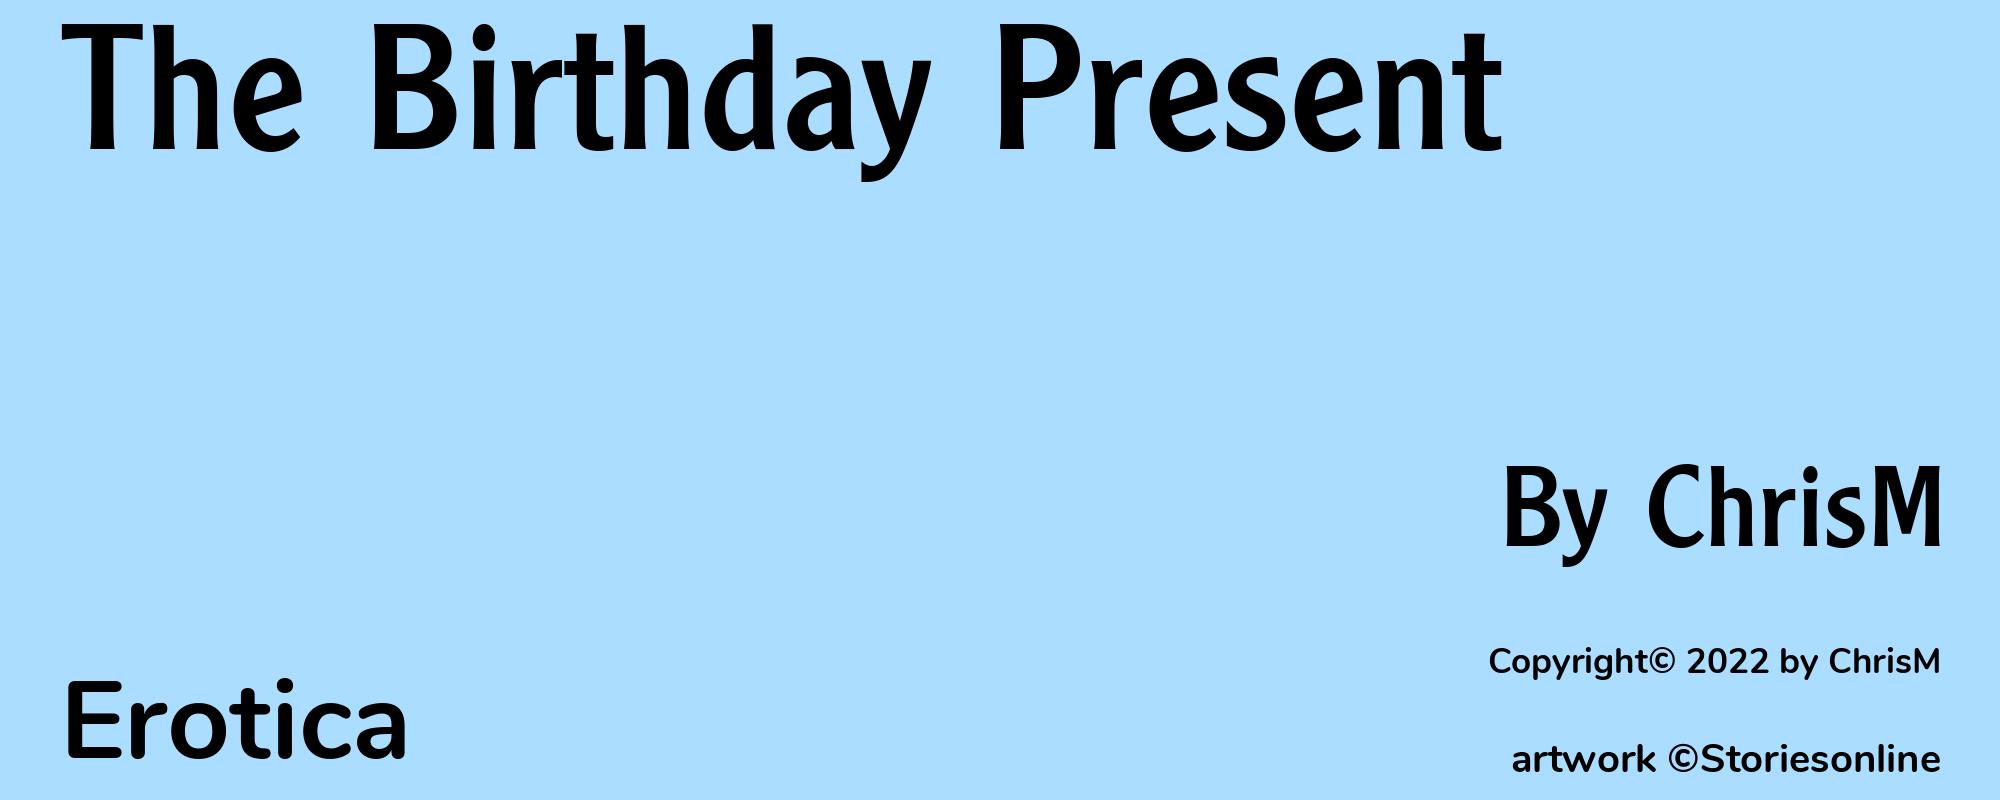 The Birthday Present - Cover